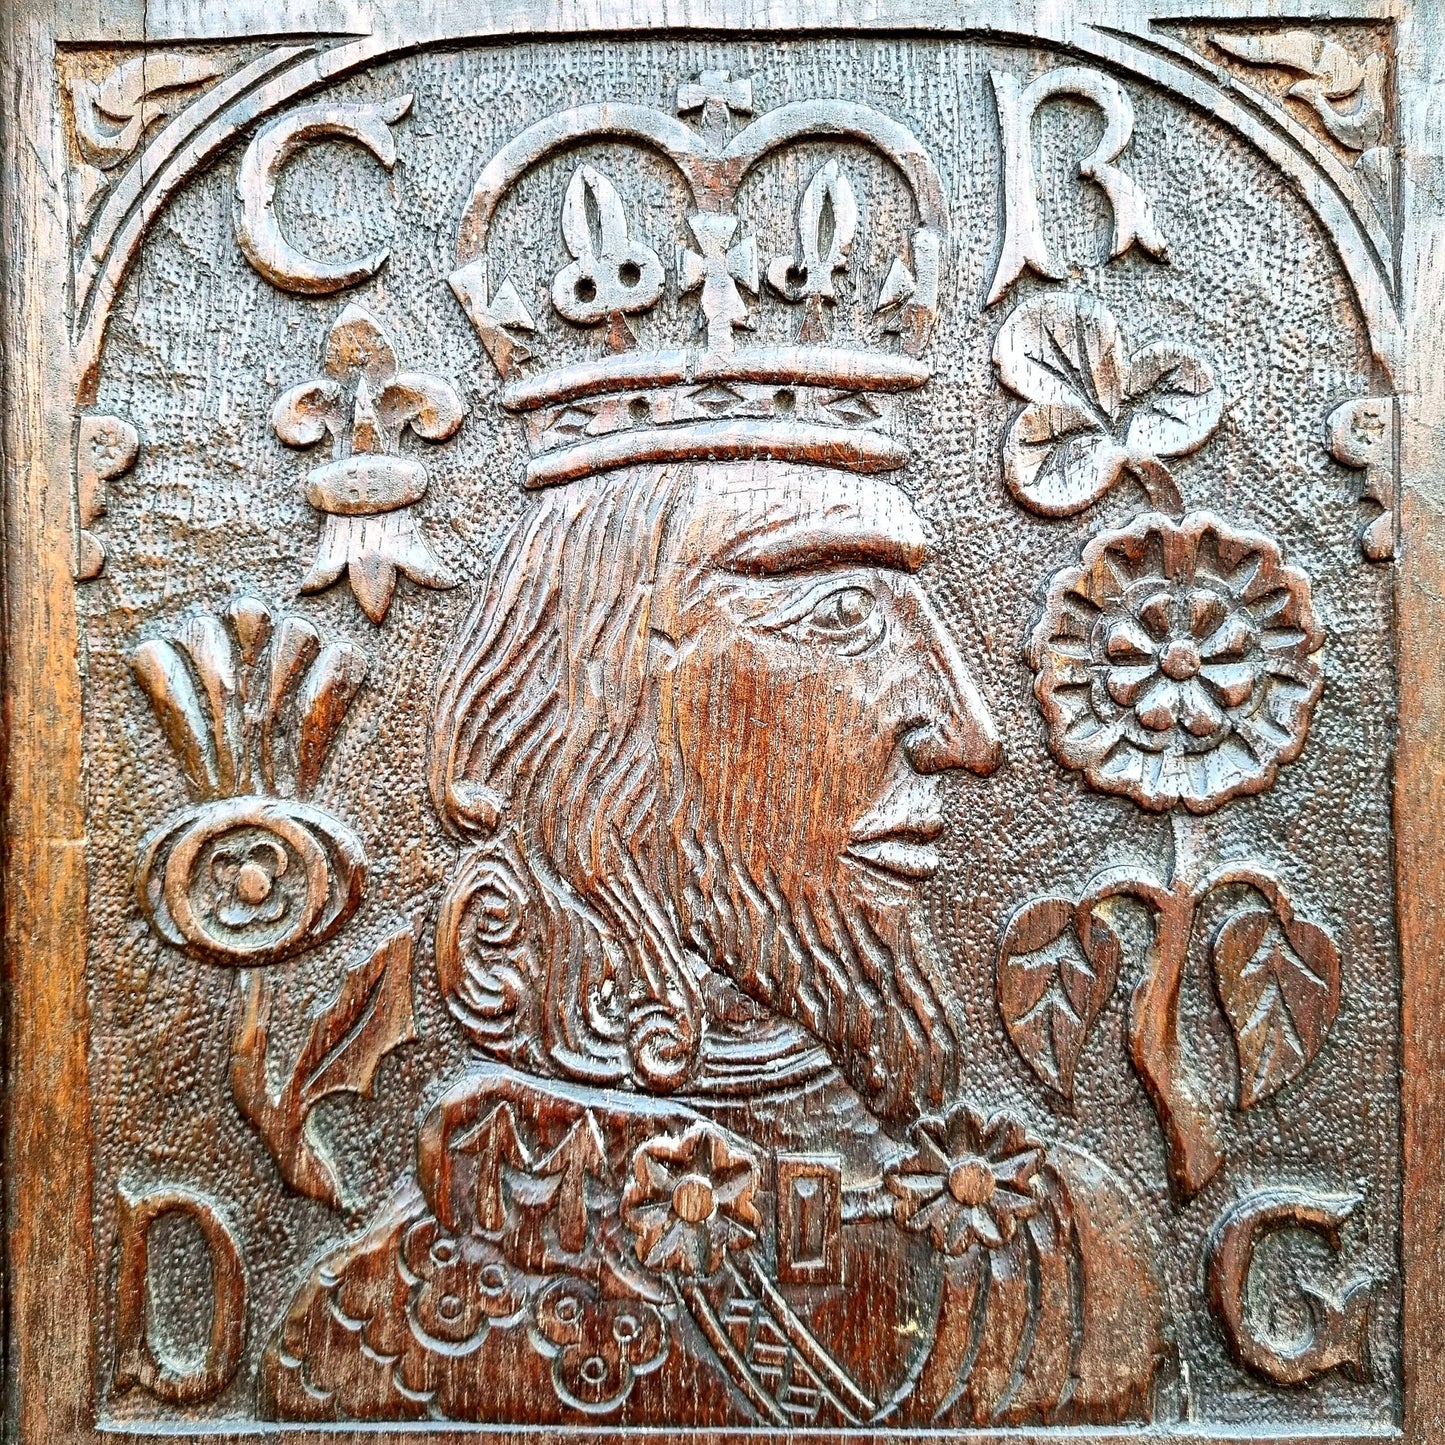 Rare 17th Century English Antique Carved Oak Portrait Panel Depicting King Charles I, Dated 1632